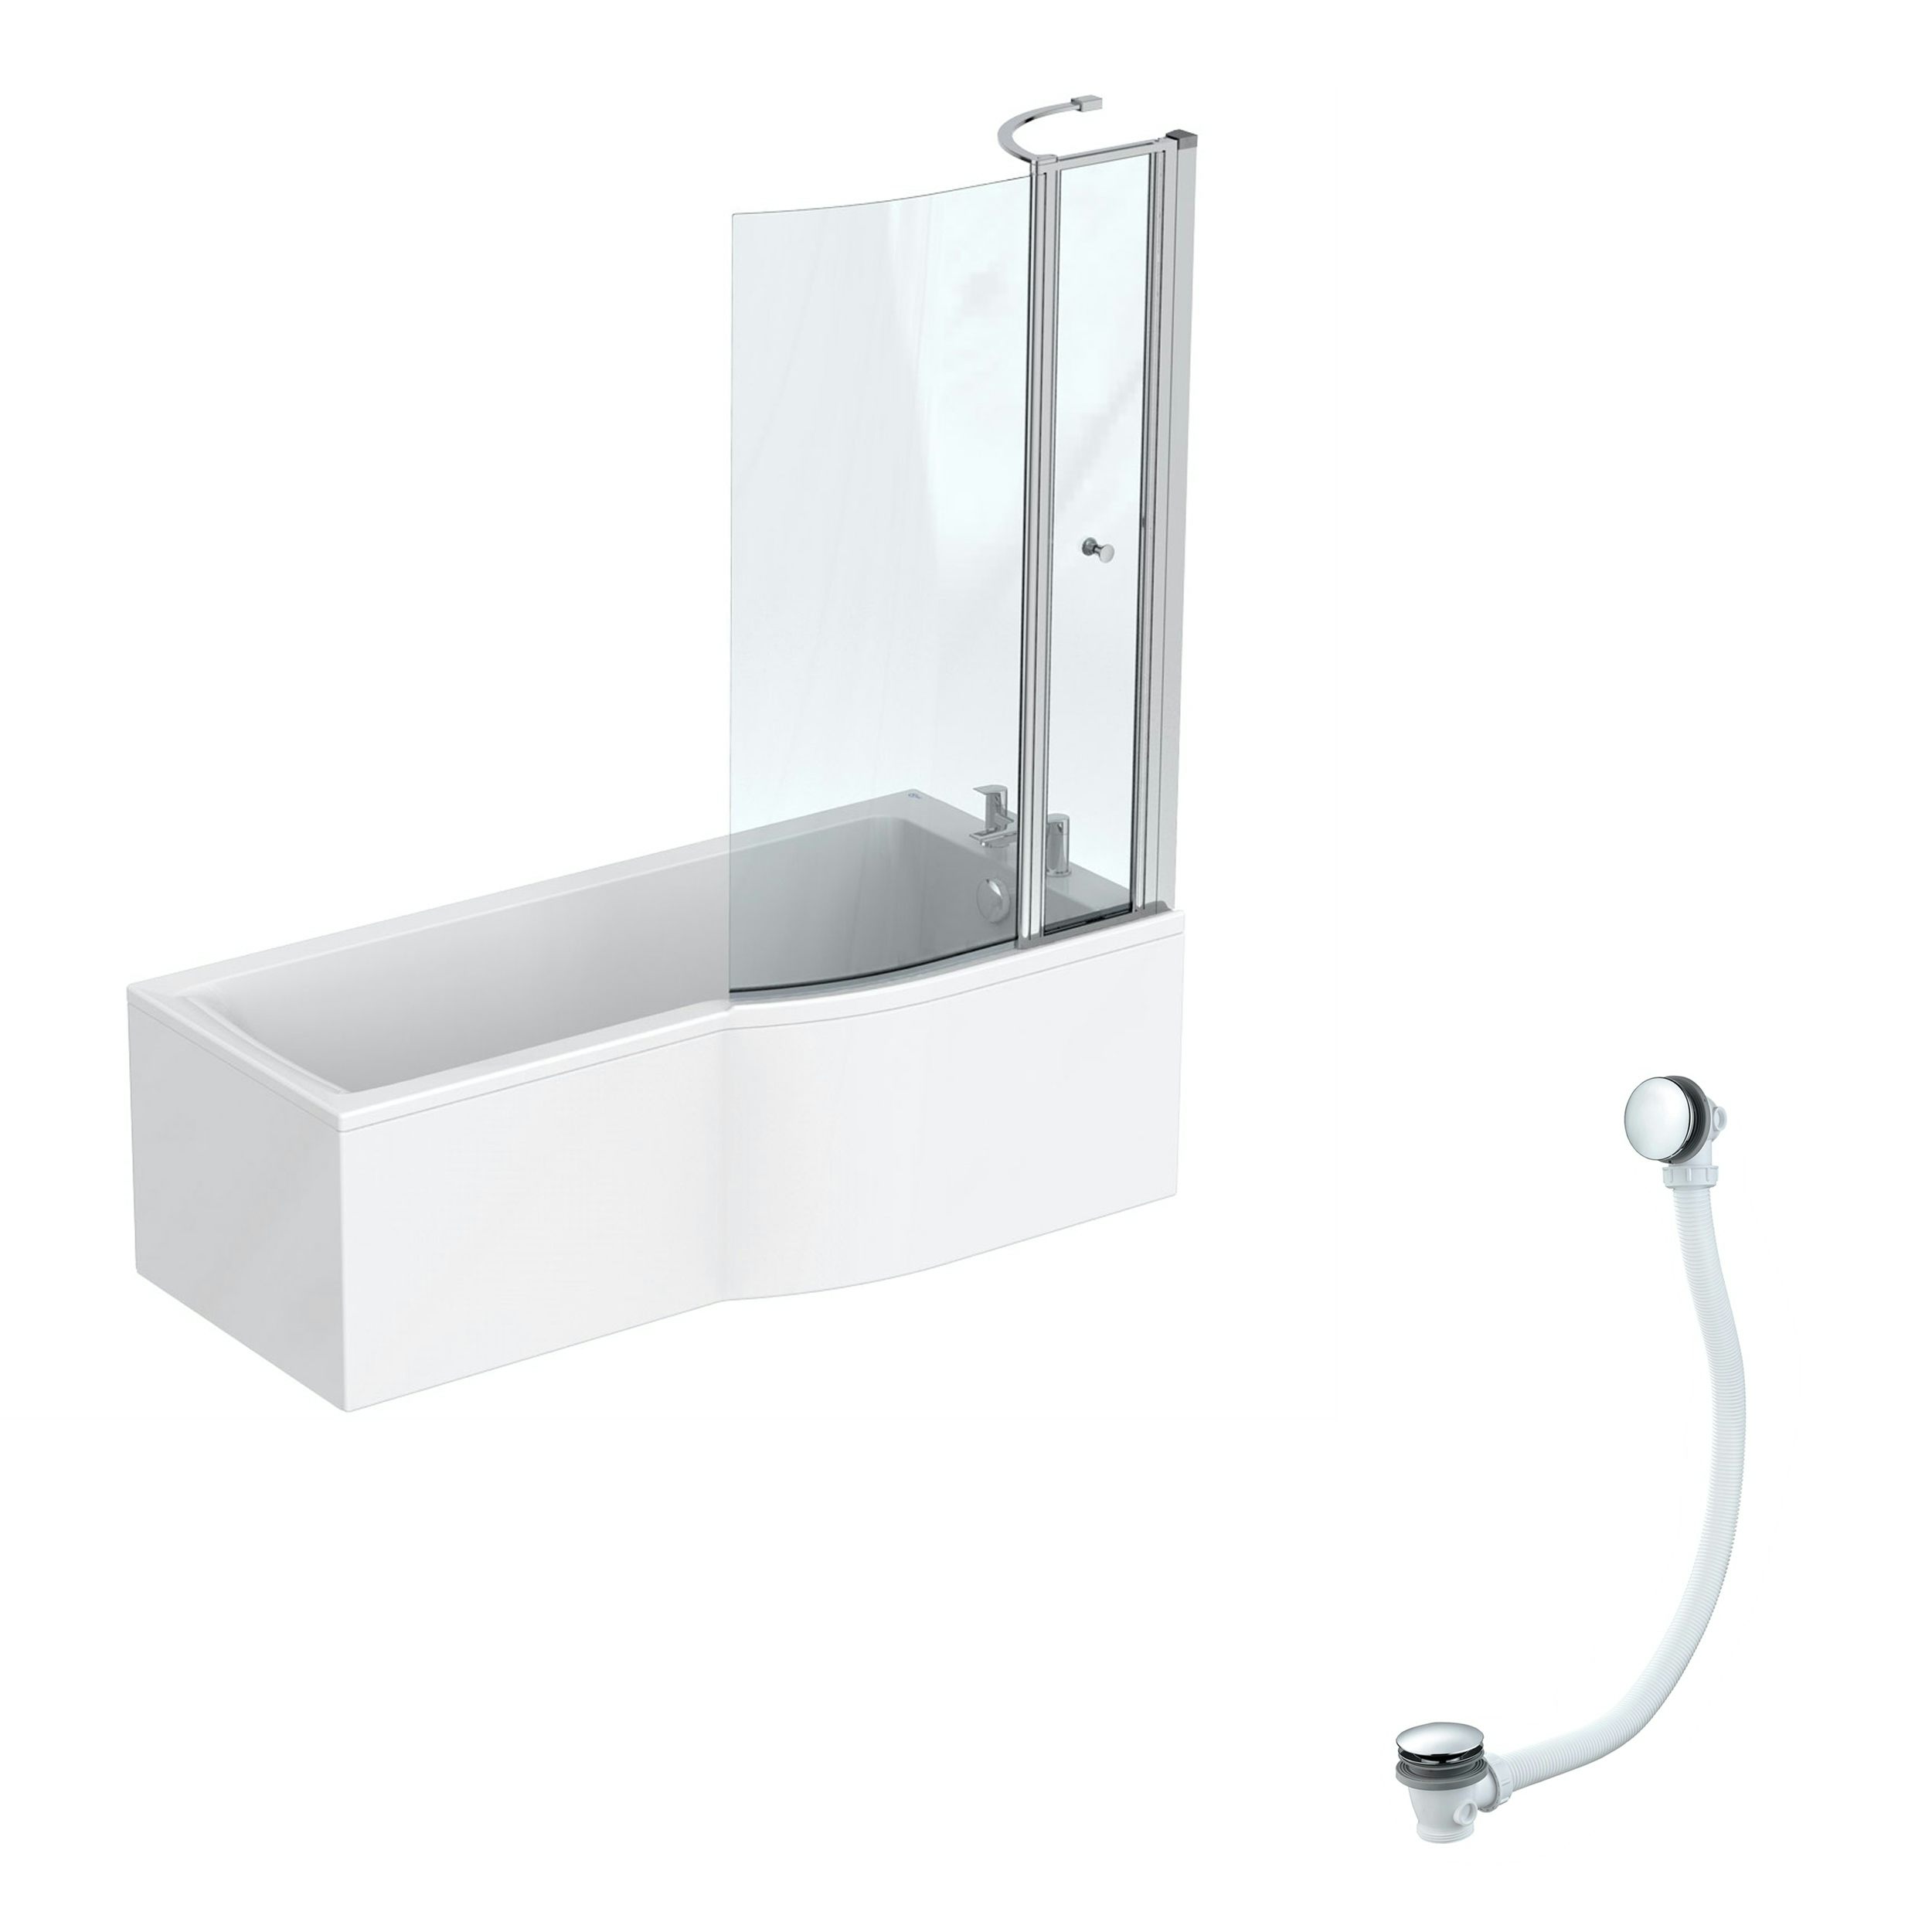 Ideal Standard Connect Air Idealform right hand shower bath 1700 x 800 with free bath waste